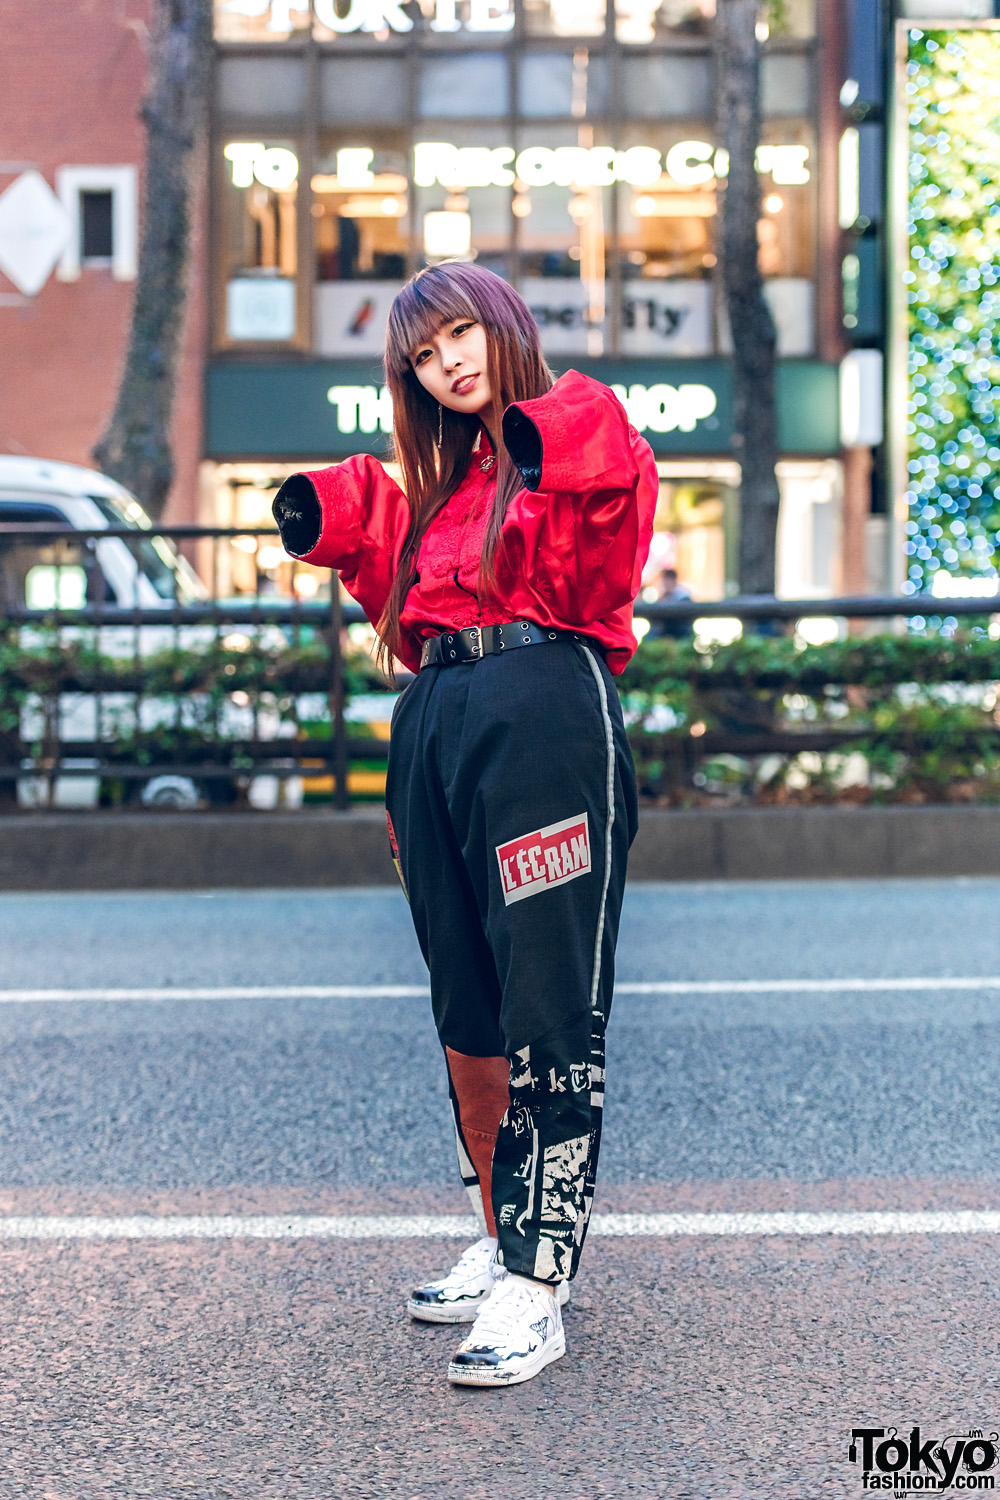 Harajuku Style w/ Pink Hair Streaks, Chinese Embroidered Satin Top, Cote Mer Graphic Pants, Bless & Nike Sneakers